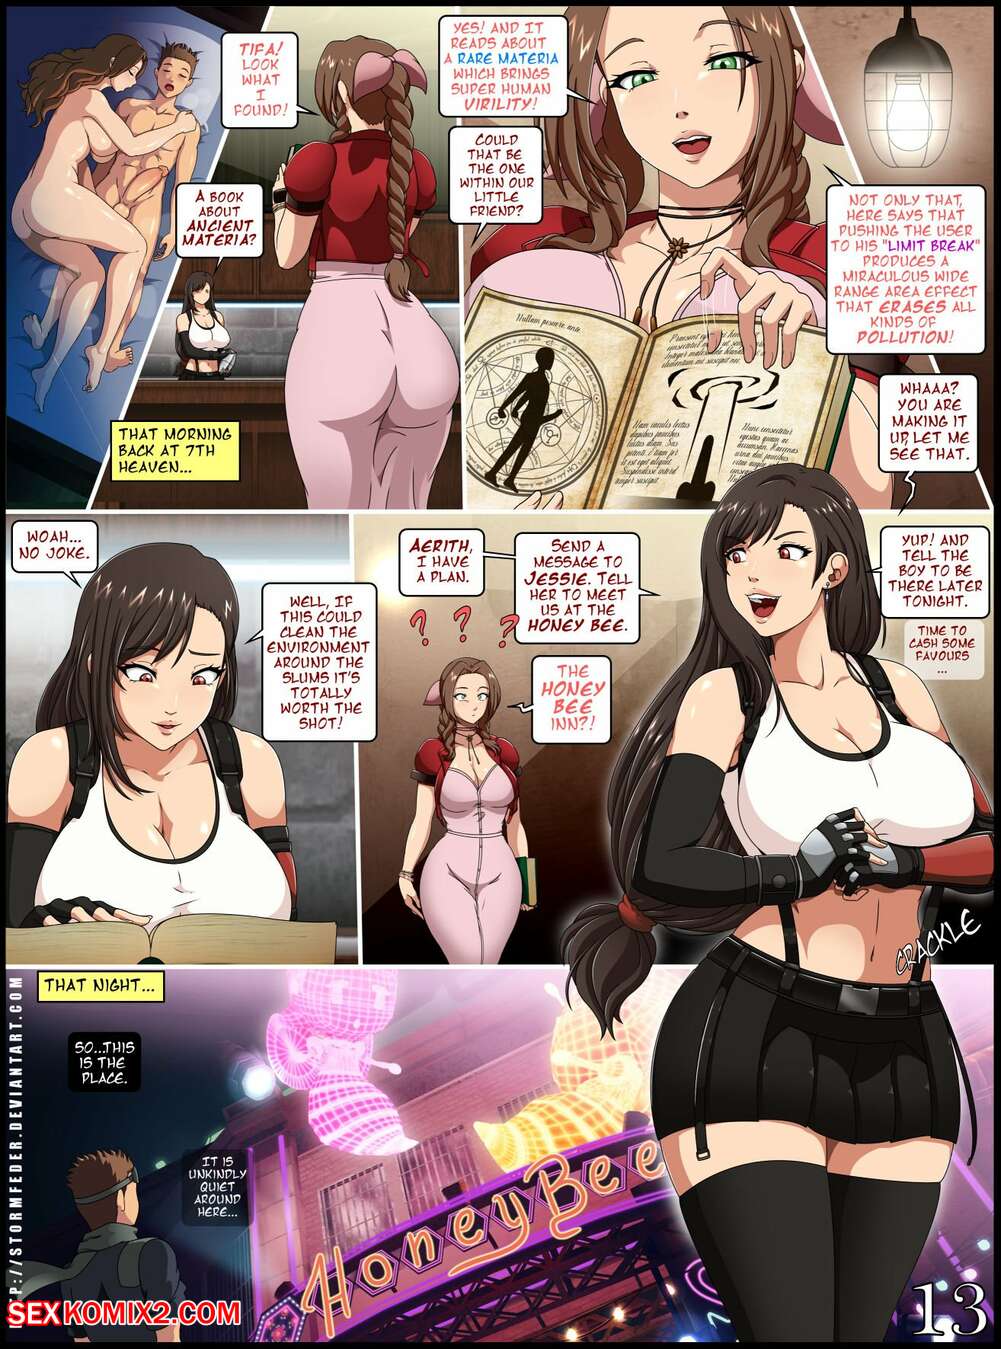 Porn comic 7th Heaven Revisited. StormFeder Sex comic hot brunette babes |  Porn comics in English for adults only | sexkomix2.com